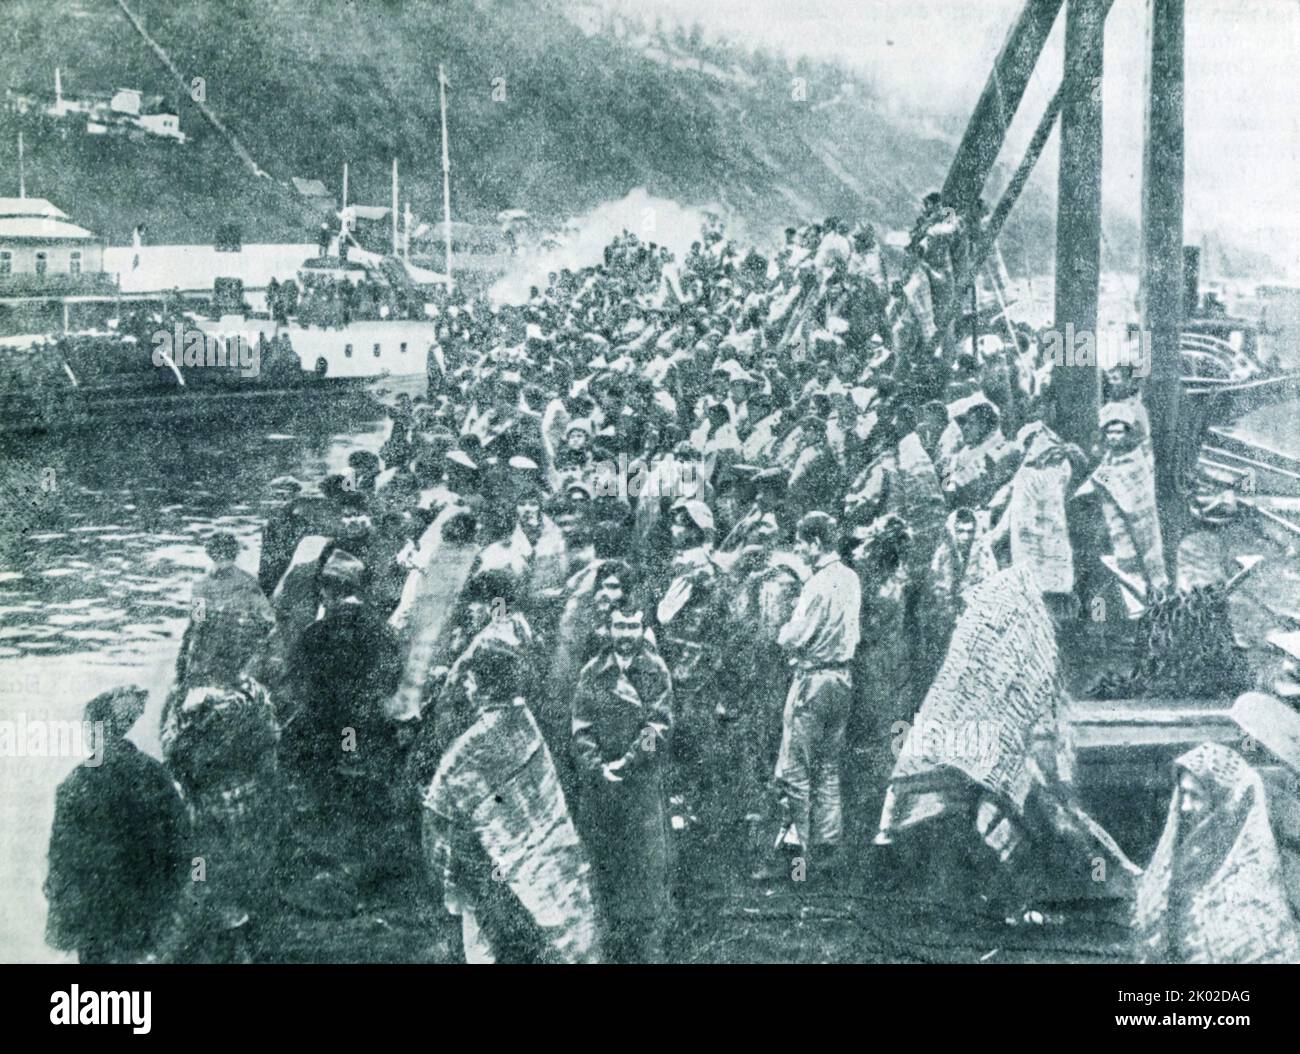 Barge with Soviet citizens freed from the White Guard captivity by sailors of the Volga military flotilla. October, 1918. &#13;&#10; Stock Photo